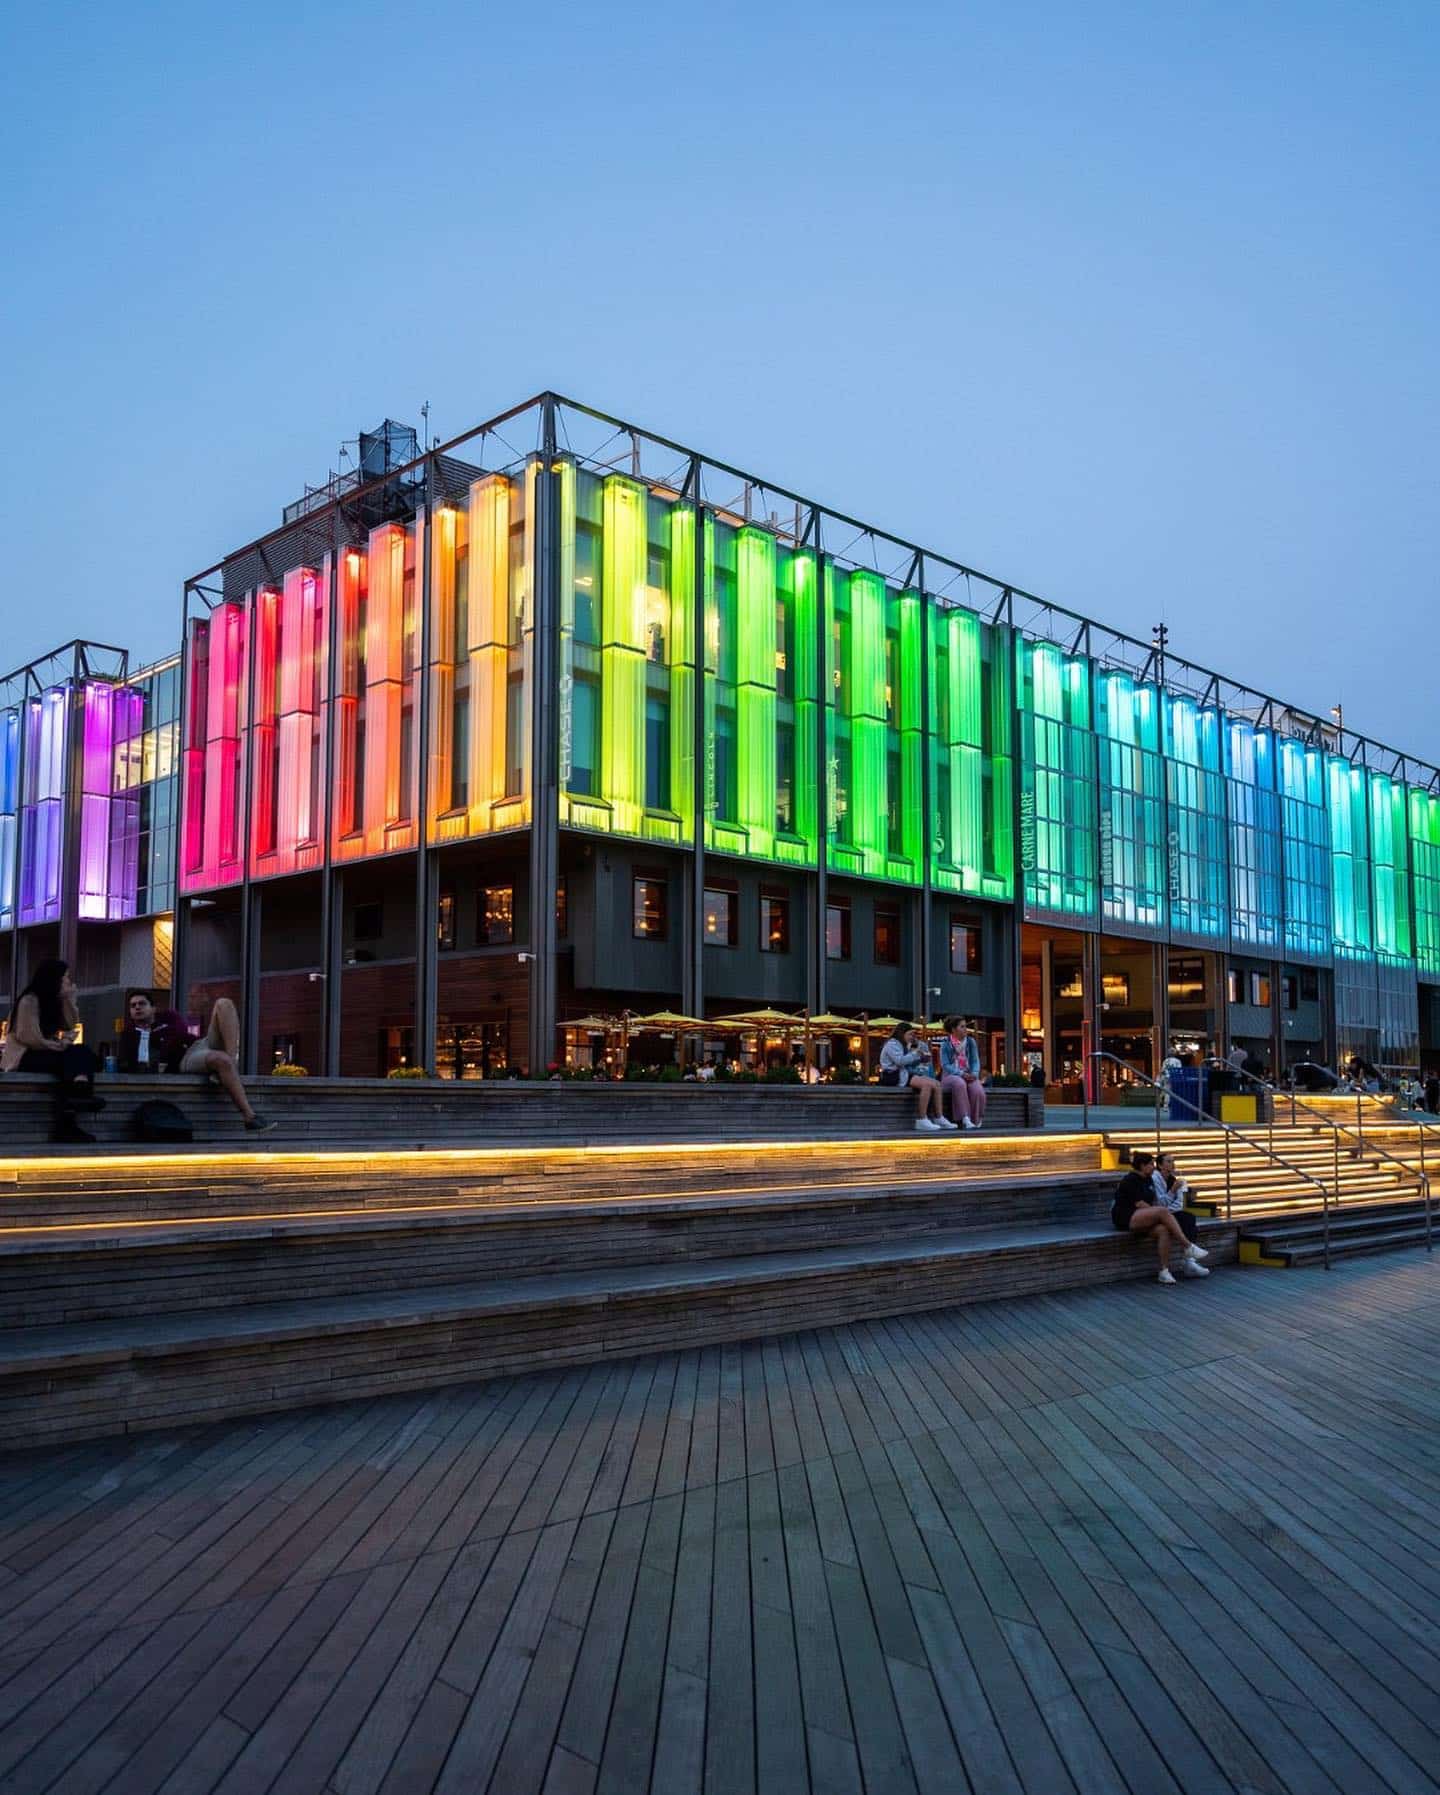 #Pride weekend in NYC starts now  Kick off your celebration at #TheSeaport ↴  Pride Dance Night Thurs, 6/22 | 6-9pm Sat, 6/24 | 11am – 6pm 🛍️ Pride Market @hesterstreetfair All Month Long  Speciality cocktails @malibufarmnewyork, @tinbuilding & @thefultonnyc 🪩 Drags Brunch every Saturday @malibufarmnework  Sweet treats @eatmisterdips & @thefultonnyc 🖤 Give backs to @aliforneycenter Details ➤ link in bio #TheSeaport